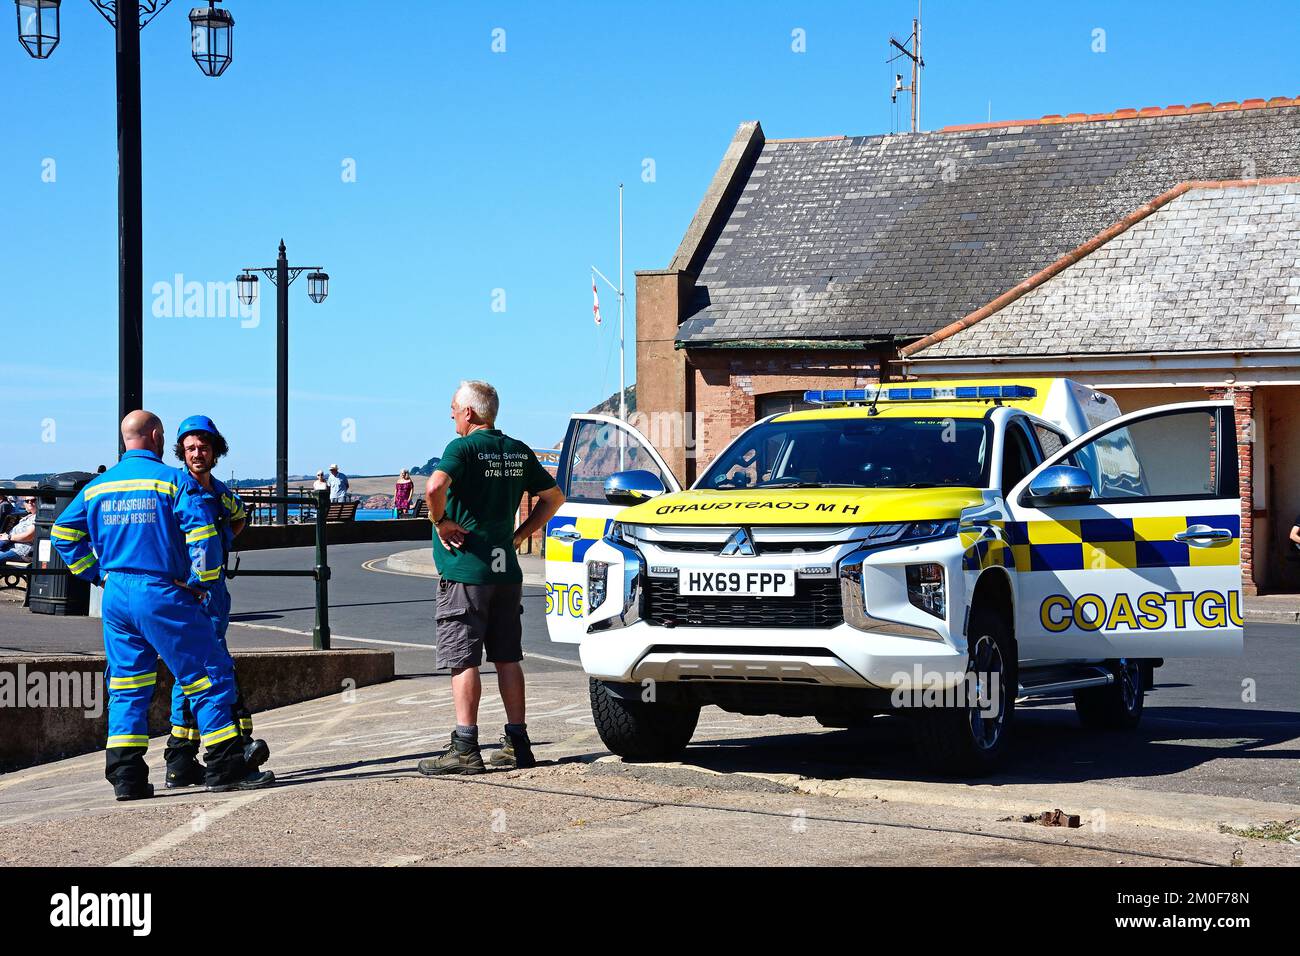 Coastguard Search and Rescue men standing by their car alongside the promenade at Pennington Point, Sidmouth, Devon, UK. Stock Photo